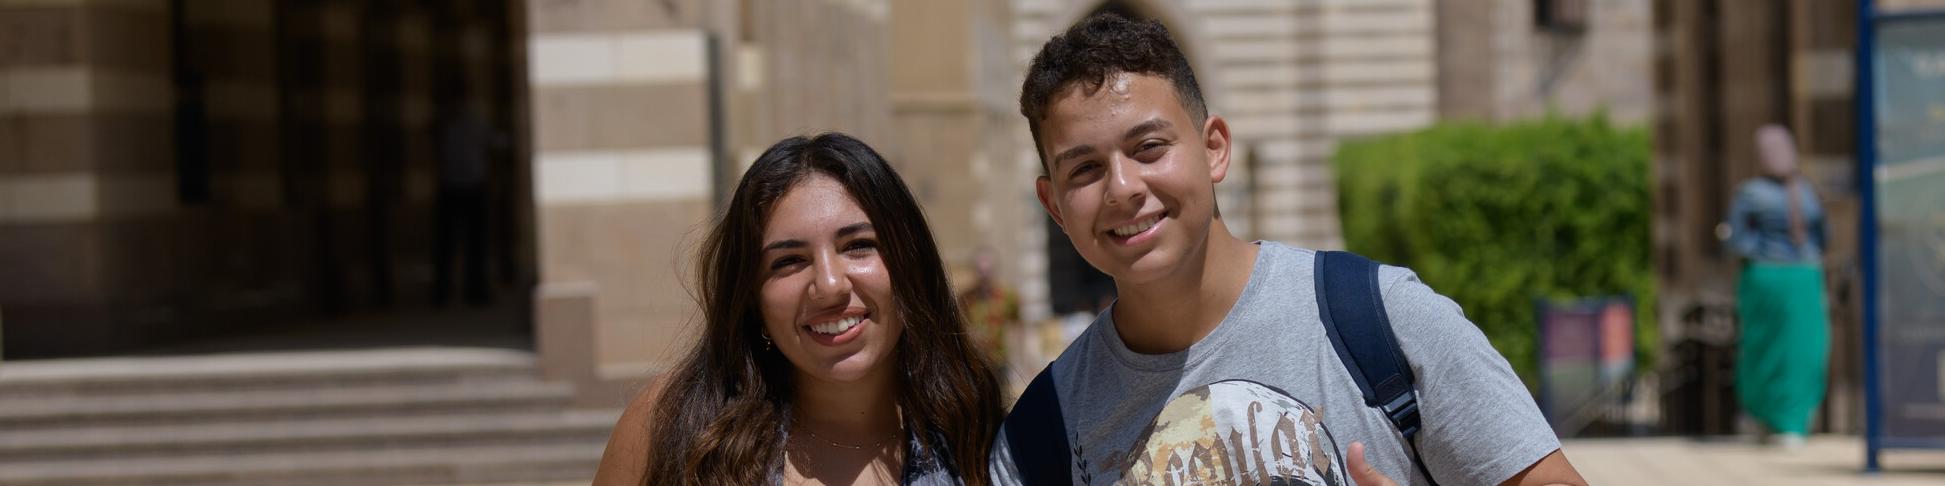 Boy and girl smiling on campus